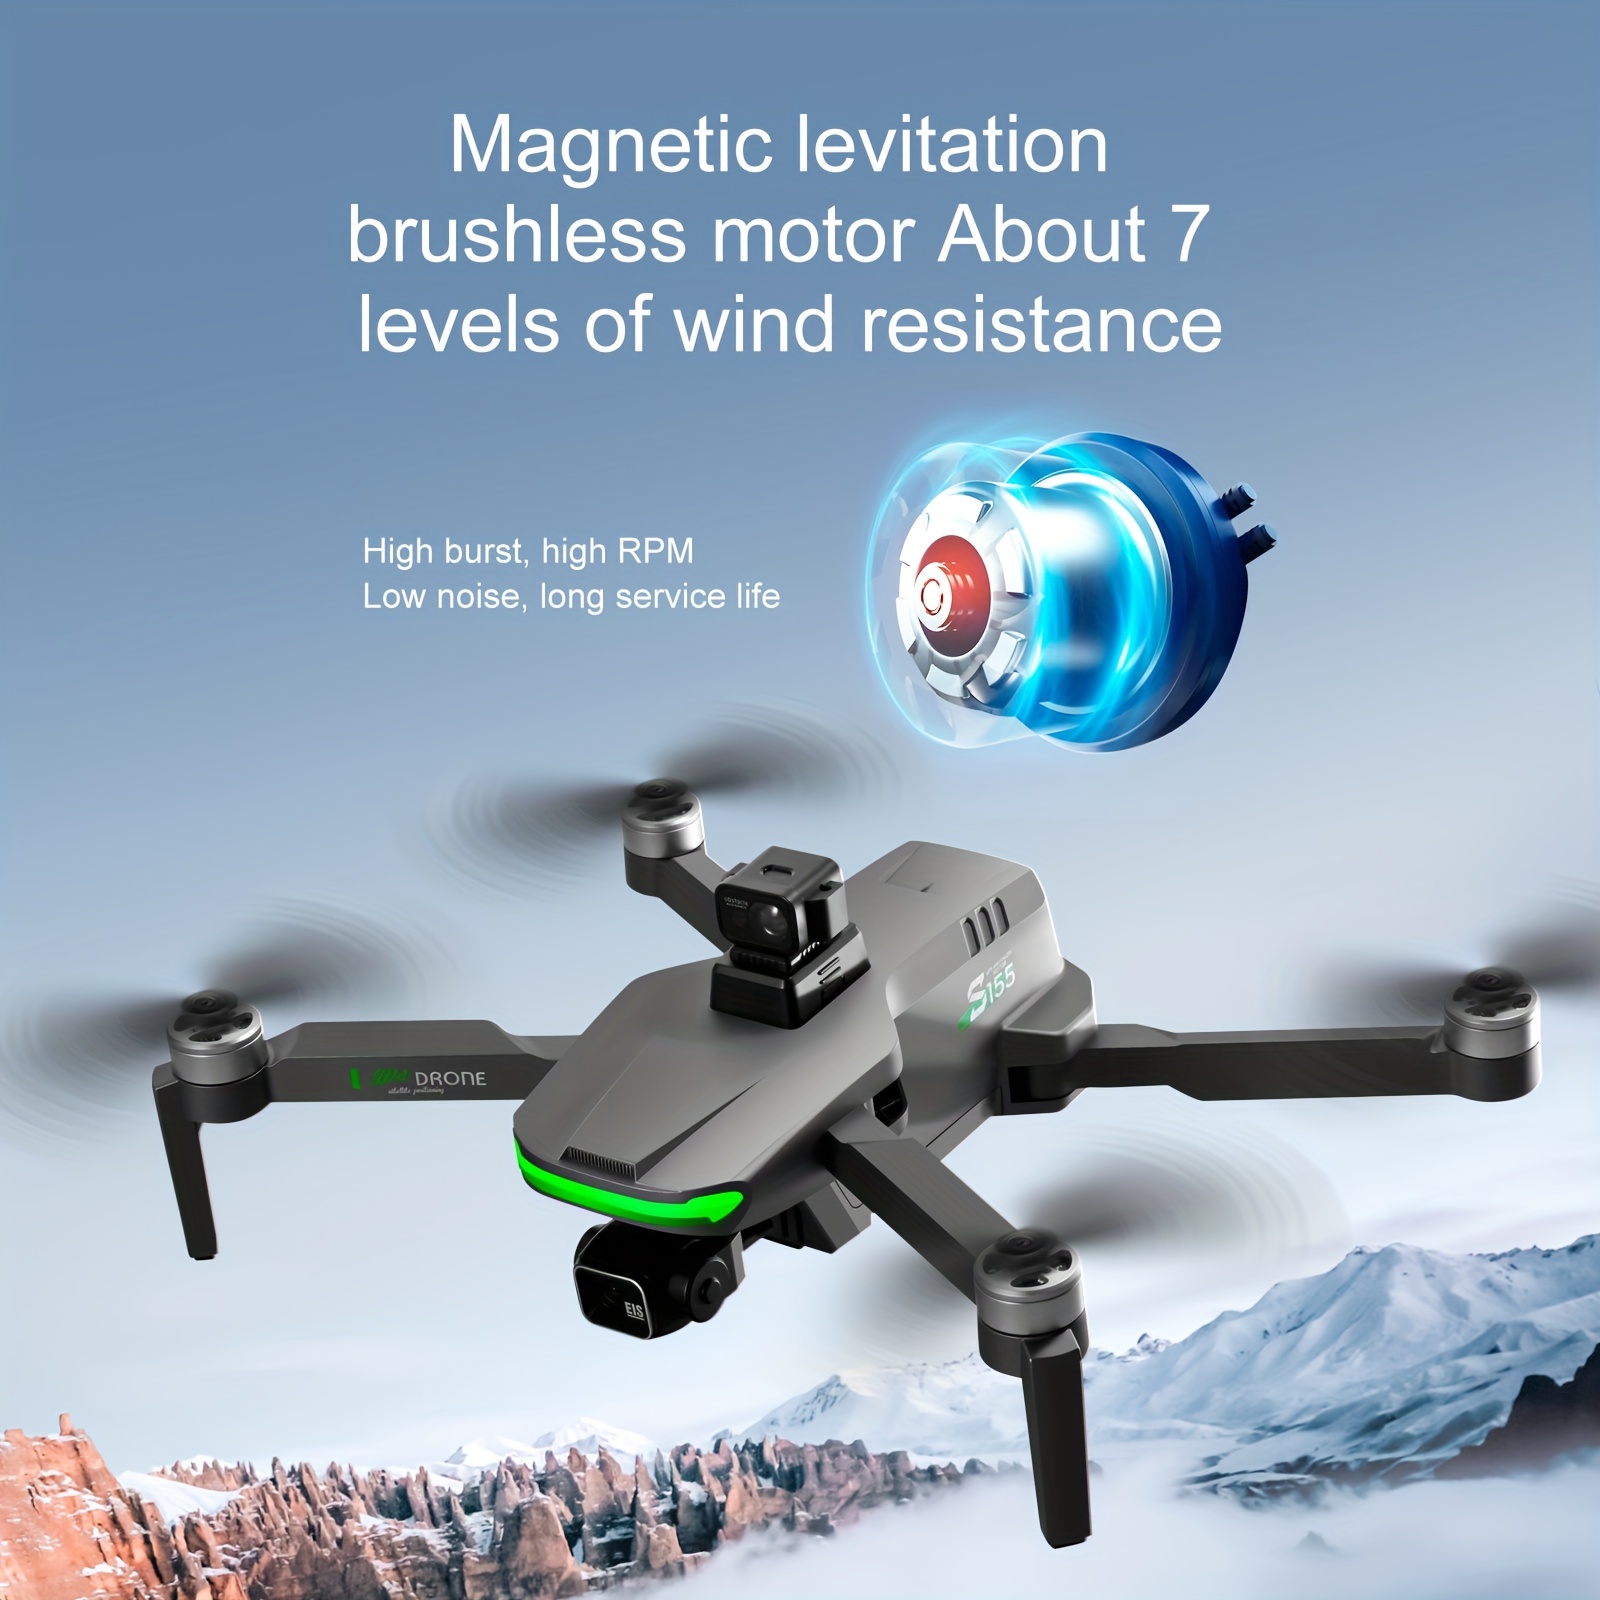 drone with 2k hdcamera news155 pro fessional quadcopter with brushless motor 500g payload and intelligent obstacle avoidance the perfect toy gift for adults kids and teenager stuff details 0